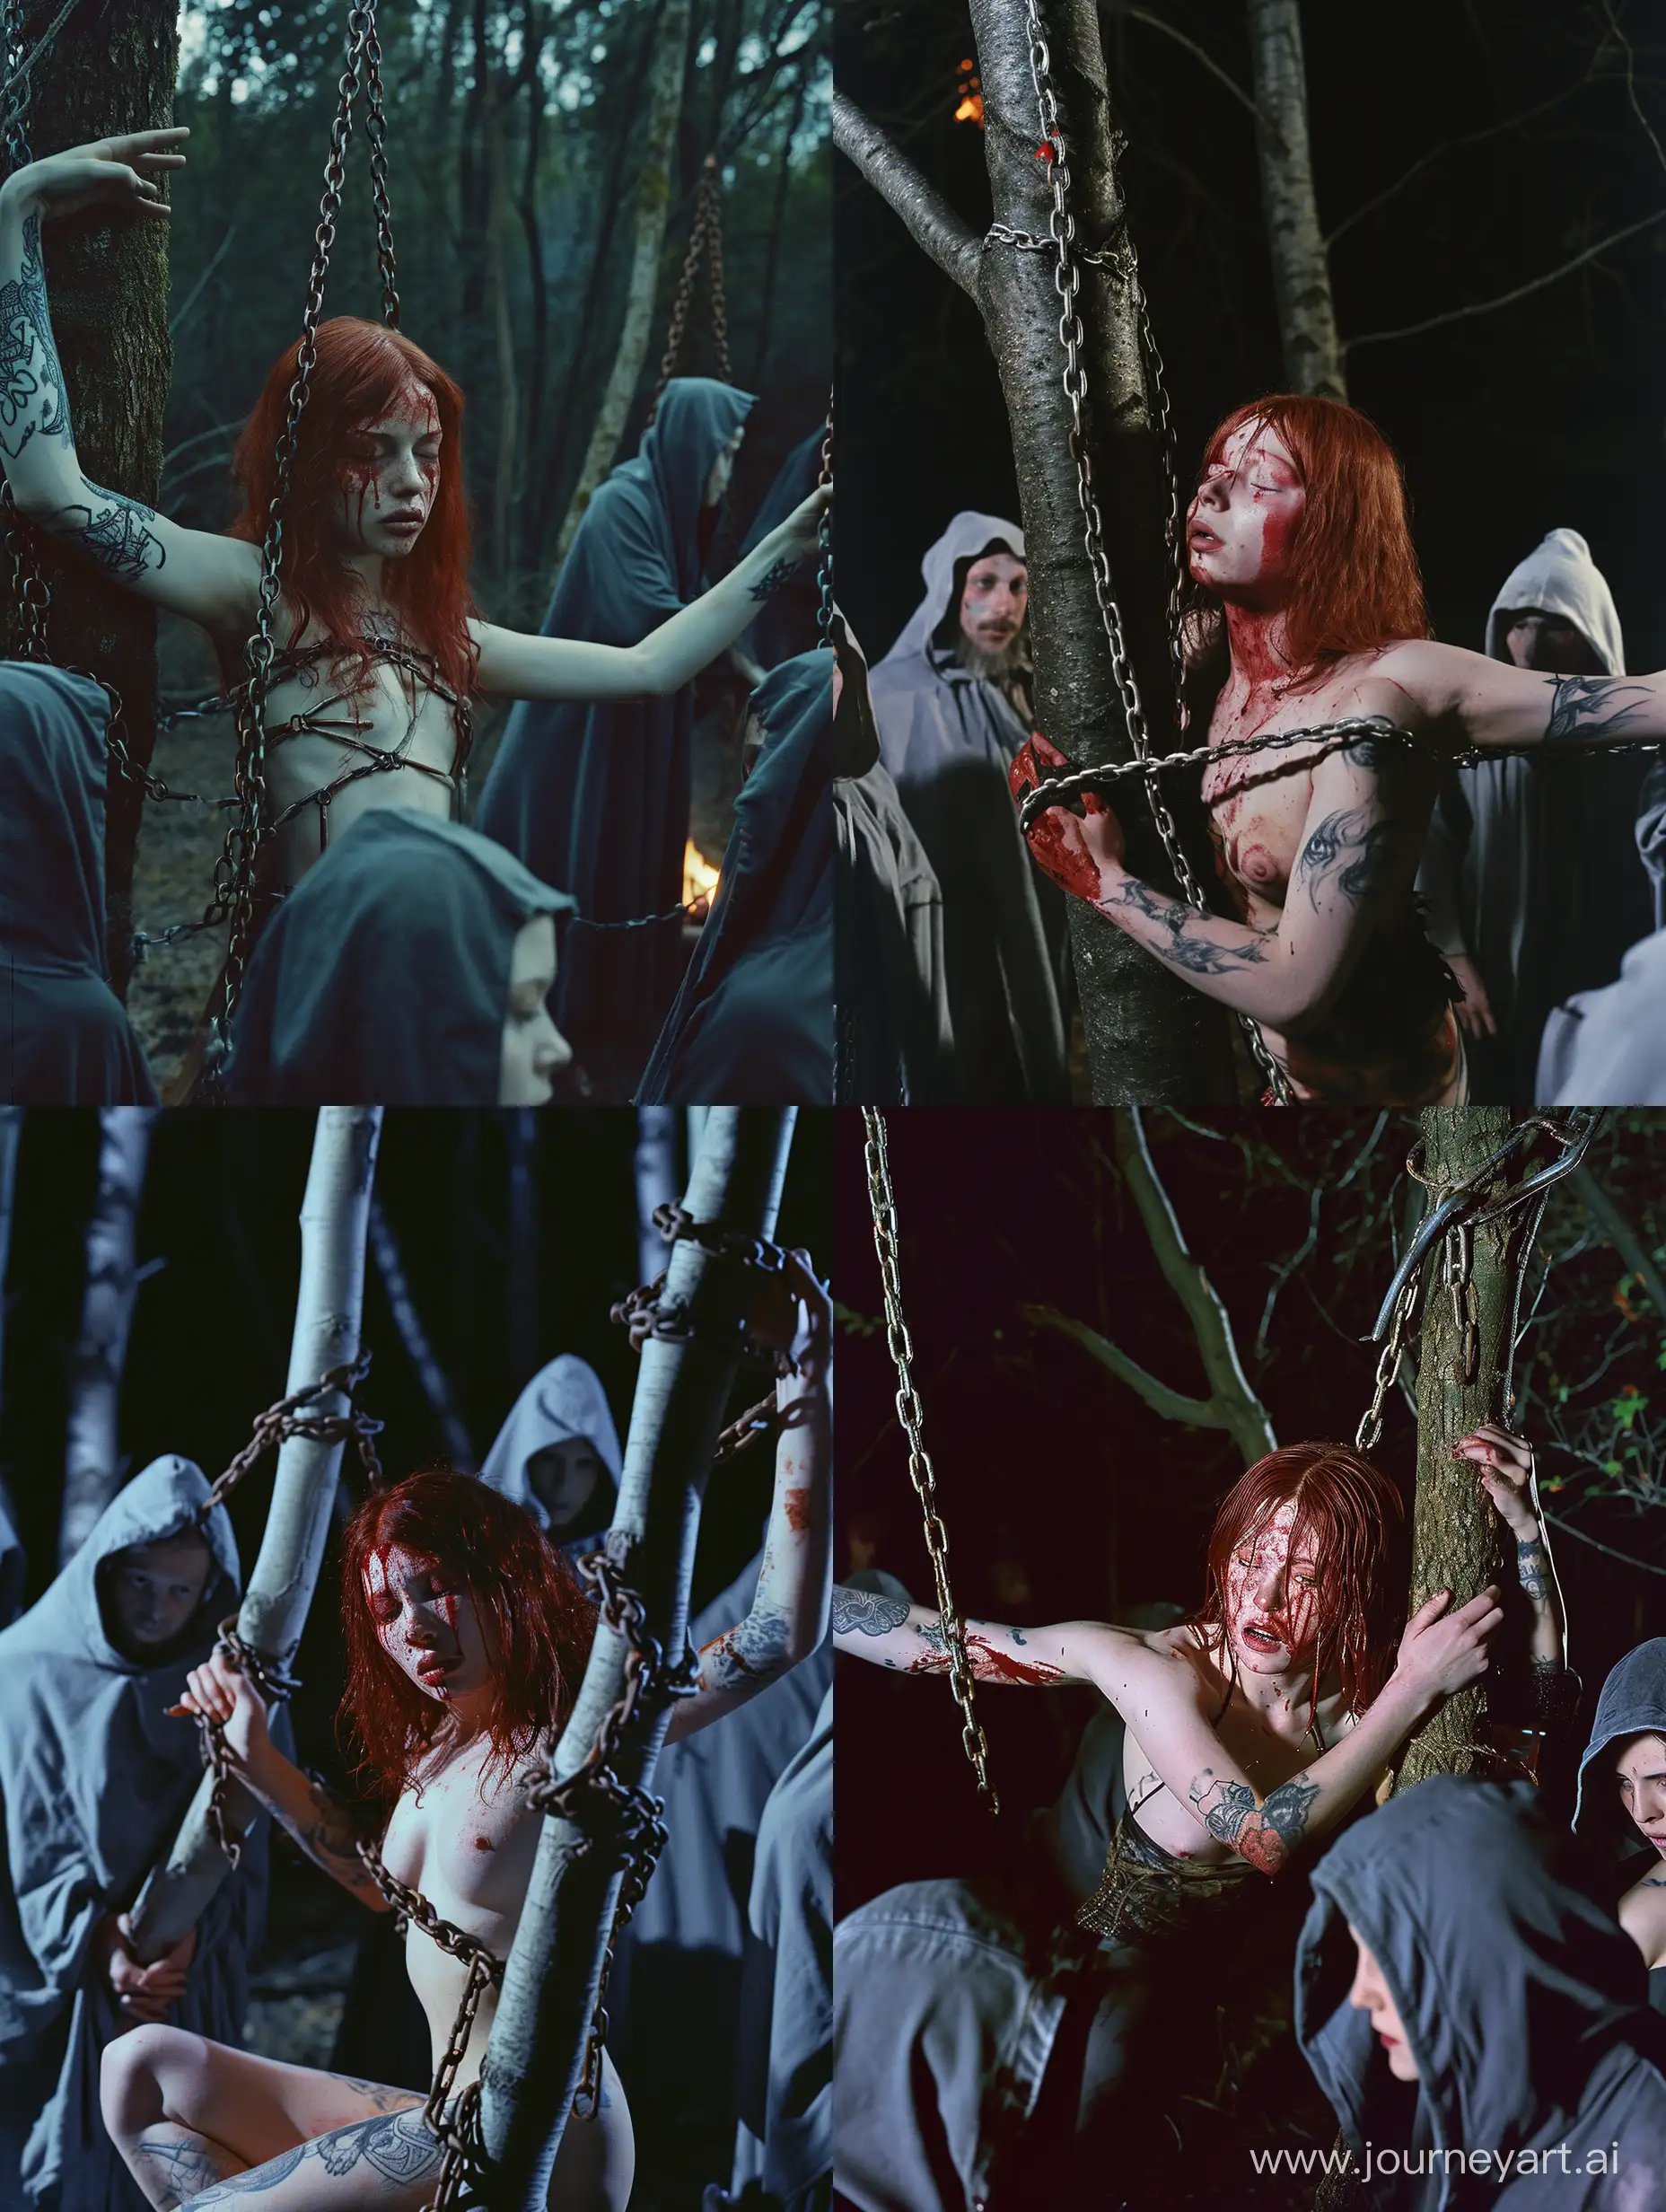 Enigmatic-Ritual-Haunting-Forest-Encounter-with-CrimsonHaired-Woman